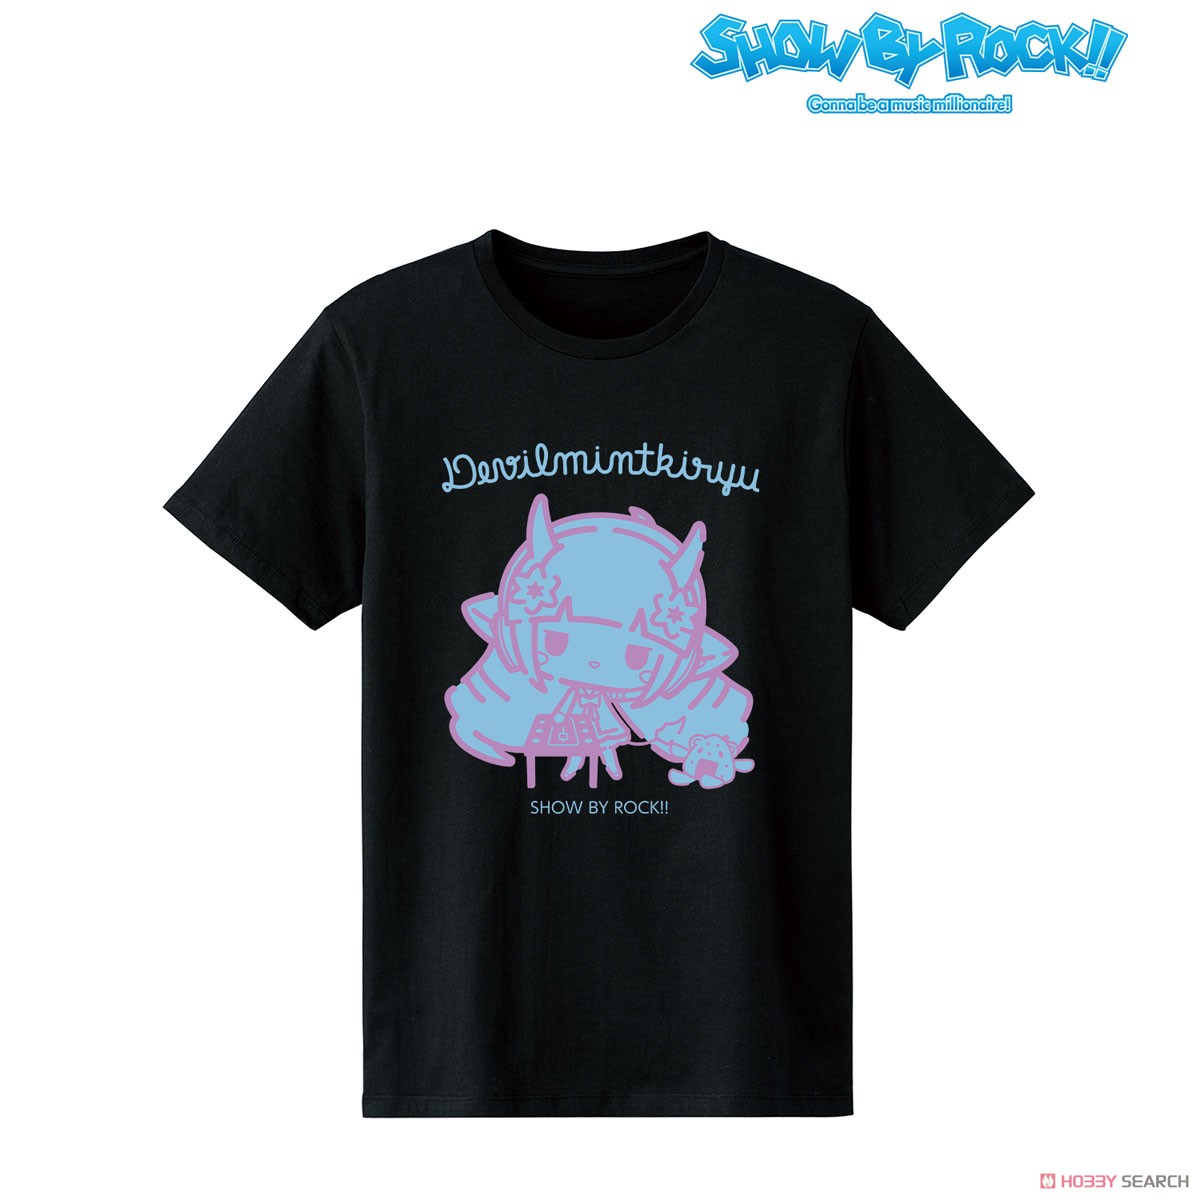 Show by Rock!! [Especially Illustrated] Delmin DJ Ver. T-Shirt Ladies XL (Anime Toy) Item picture1